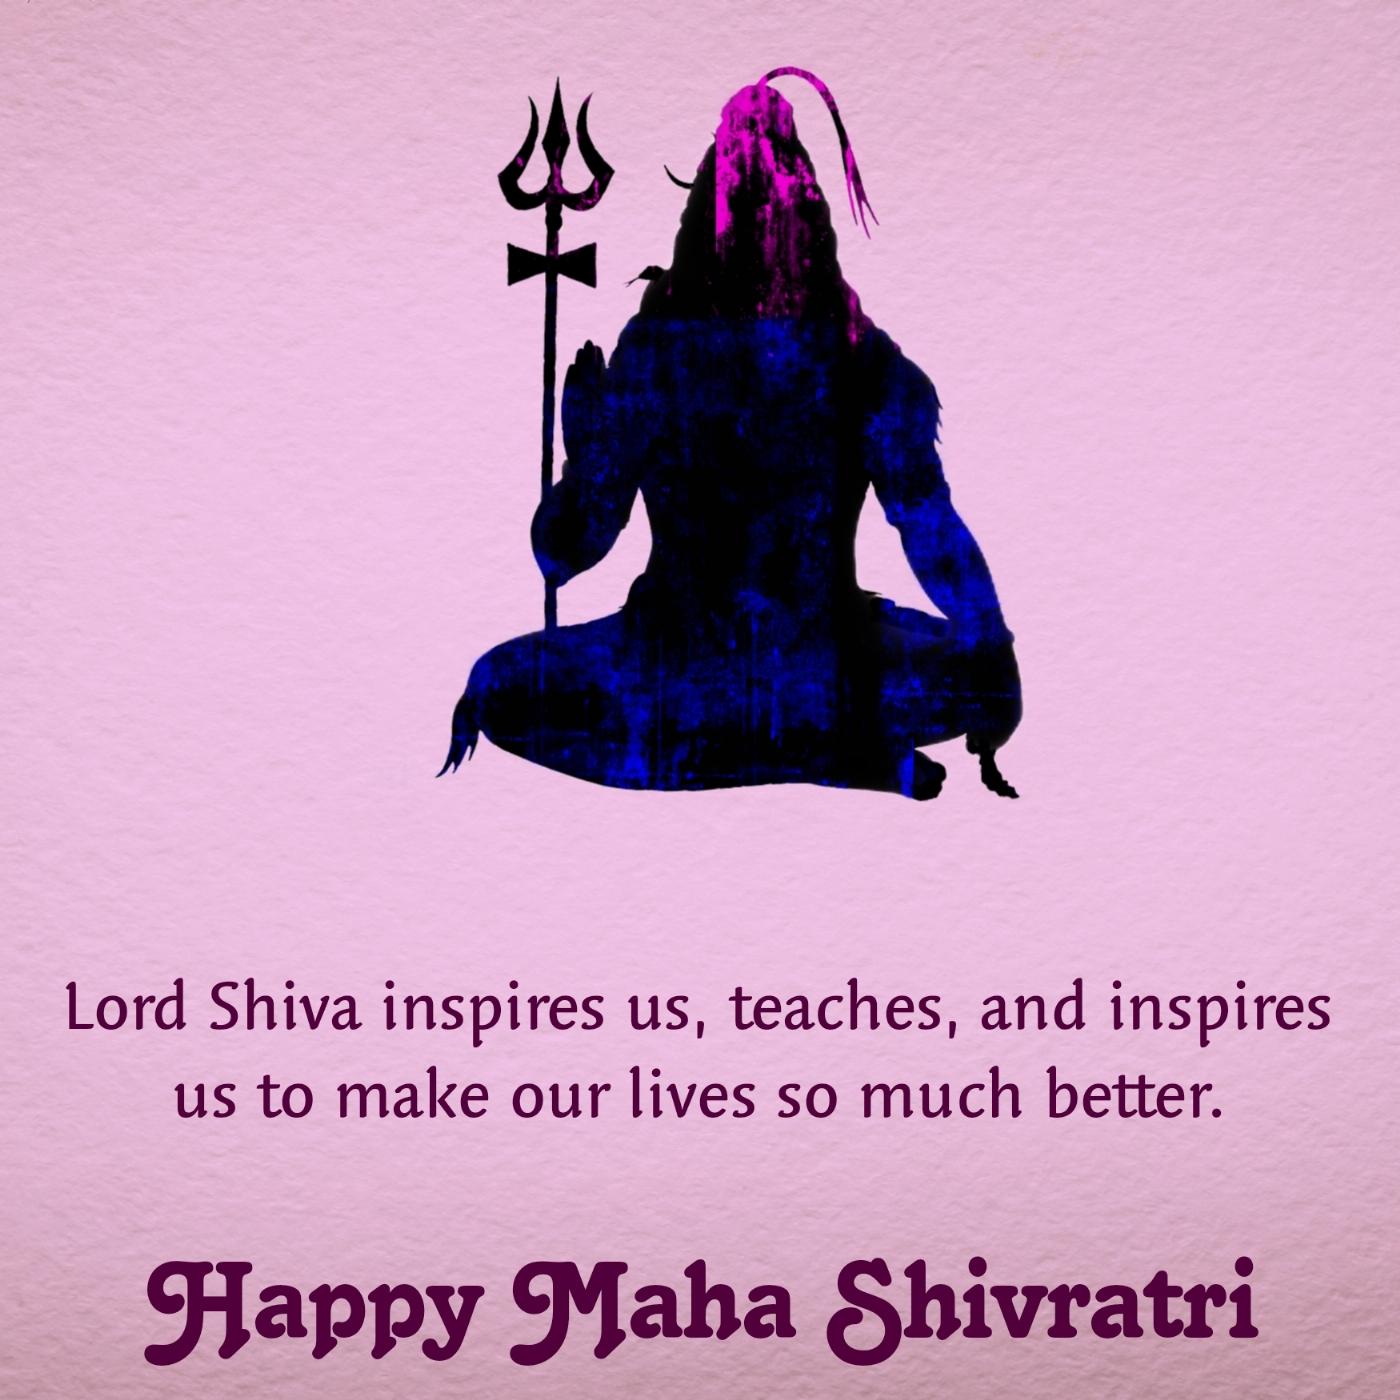 Lord Shiva inspires us teaches and inspires us to make our lives